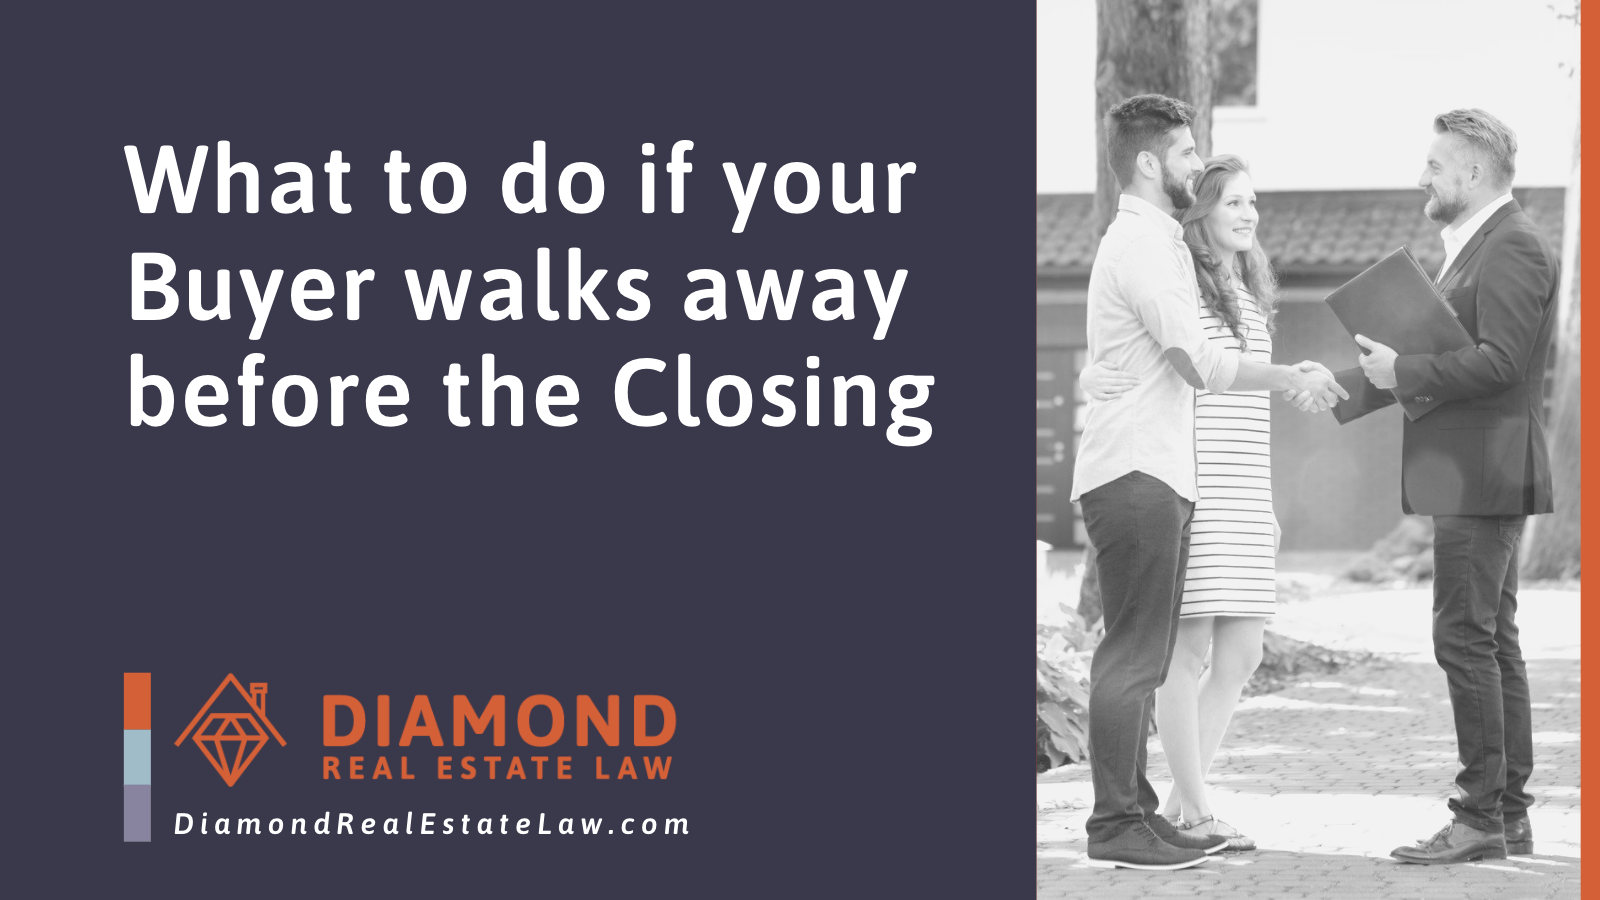 What to do if your Buyer walks away before the Closing - Diamond Real Estate Law | McHenry, IL Residential Real Estate Lawyer